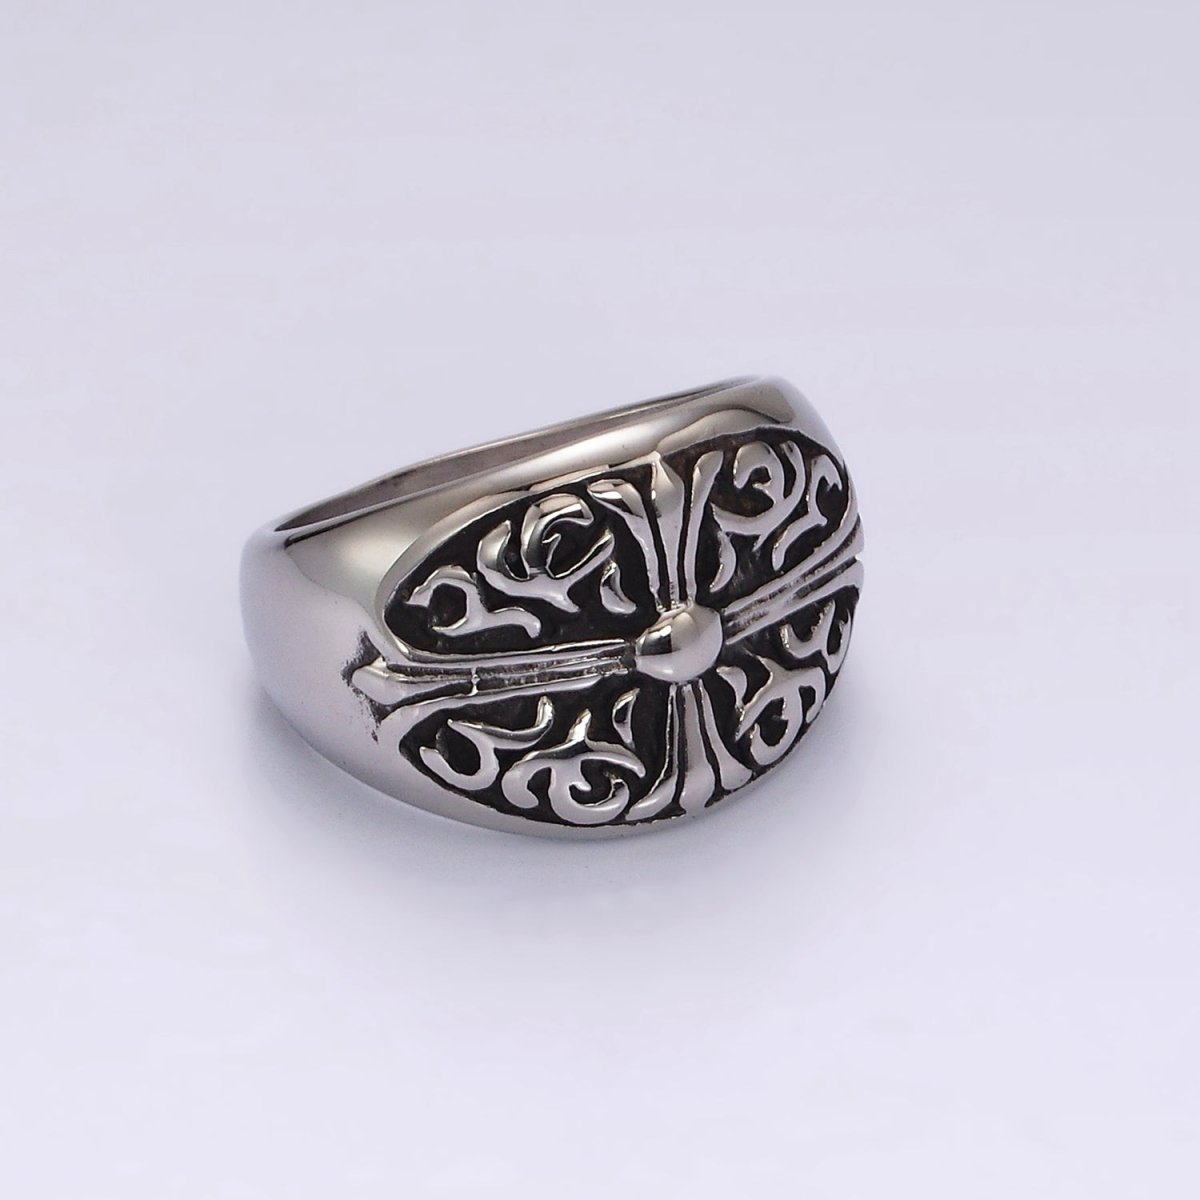 Stainless Steel Fleury Cross Artisan Oval Signet Ring in Gold & Silver | O1239 - O1244 - DLUXCA